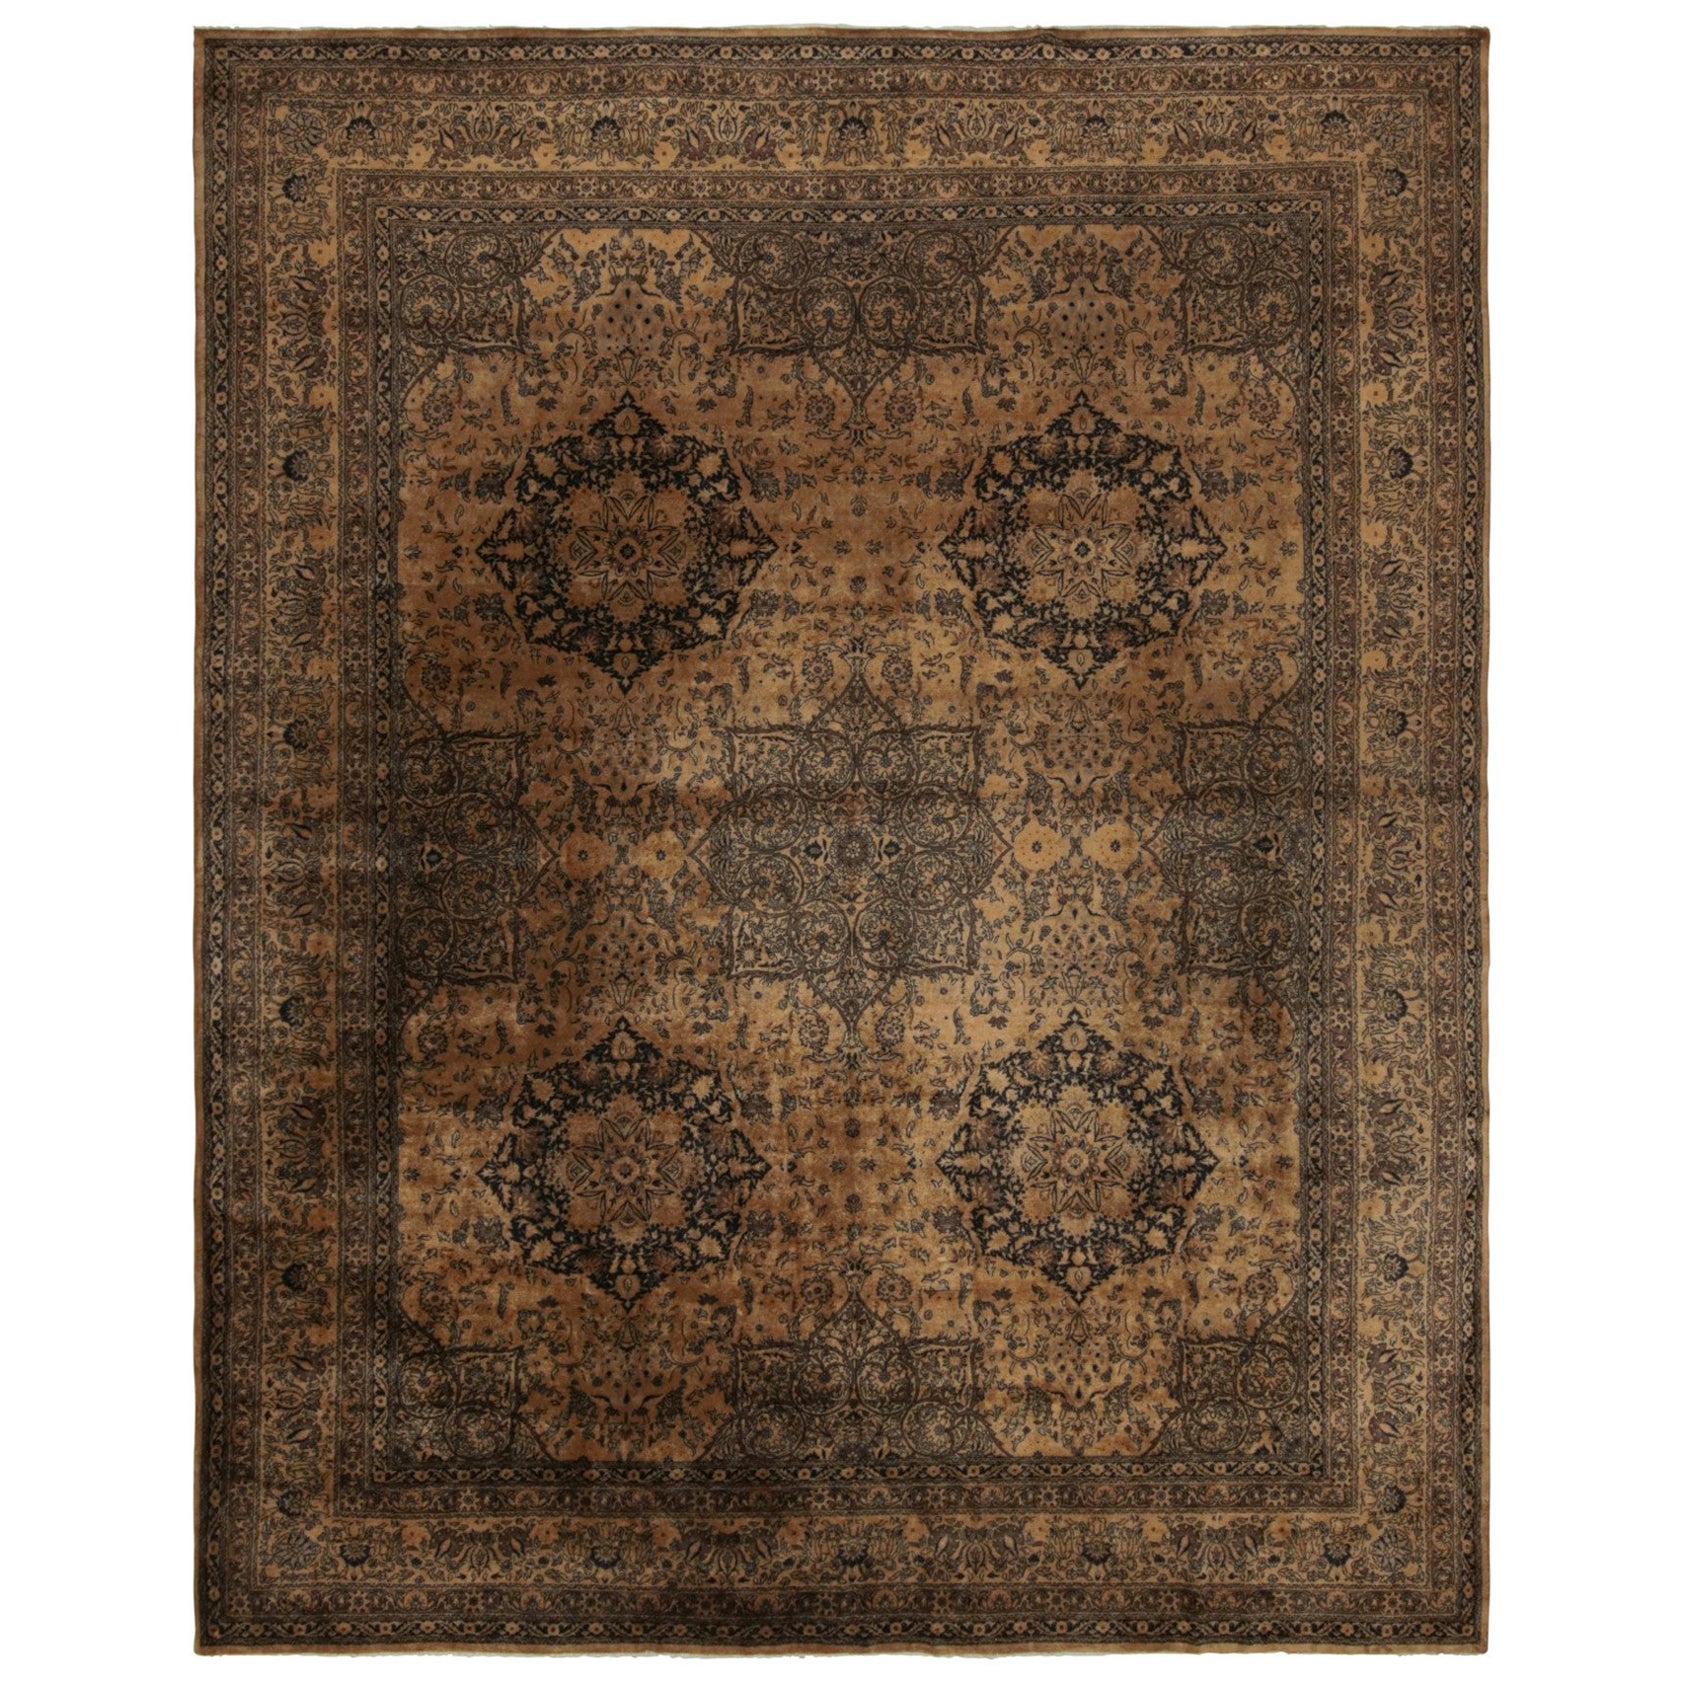 Antique Persian Tabriz Rug in Brown, with Geometric Patterns, from Rug & Kilim For Sale